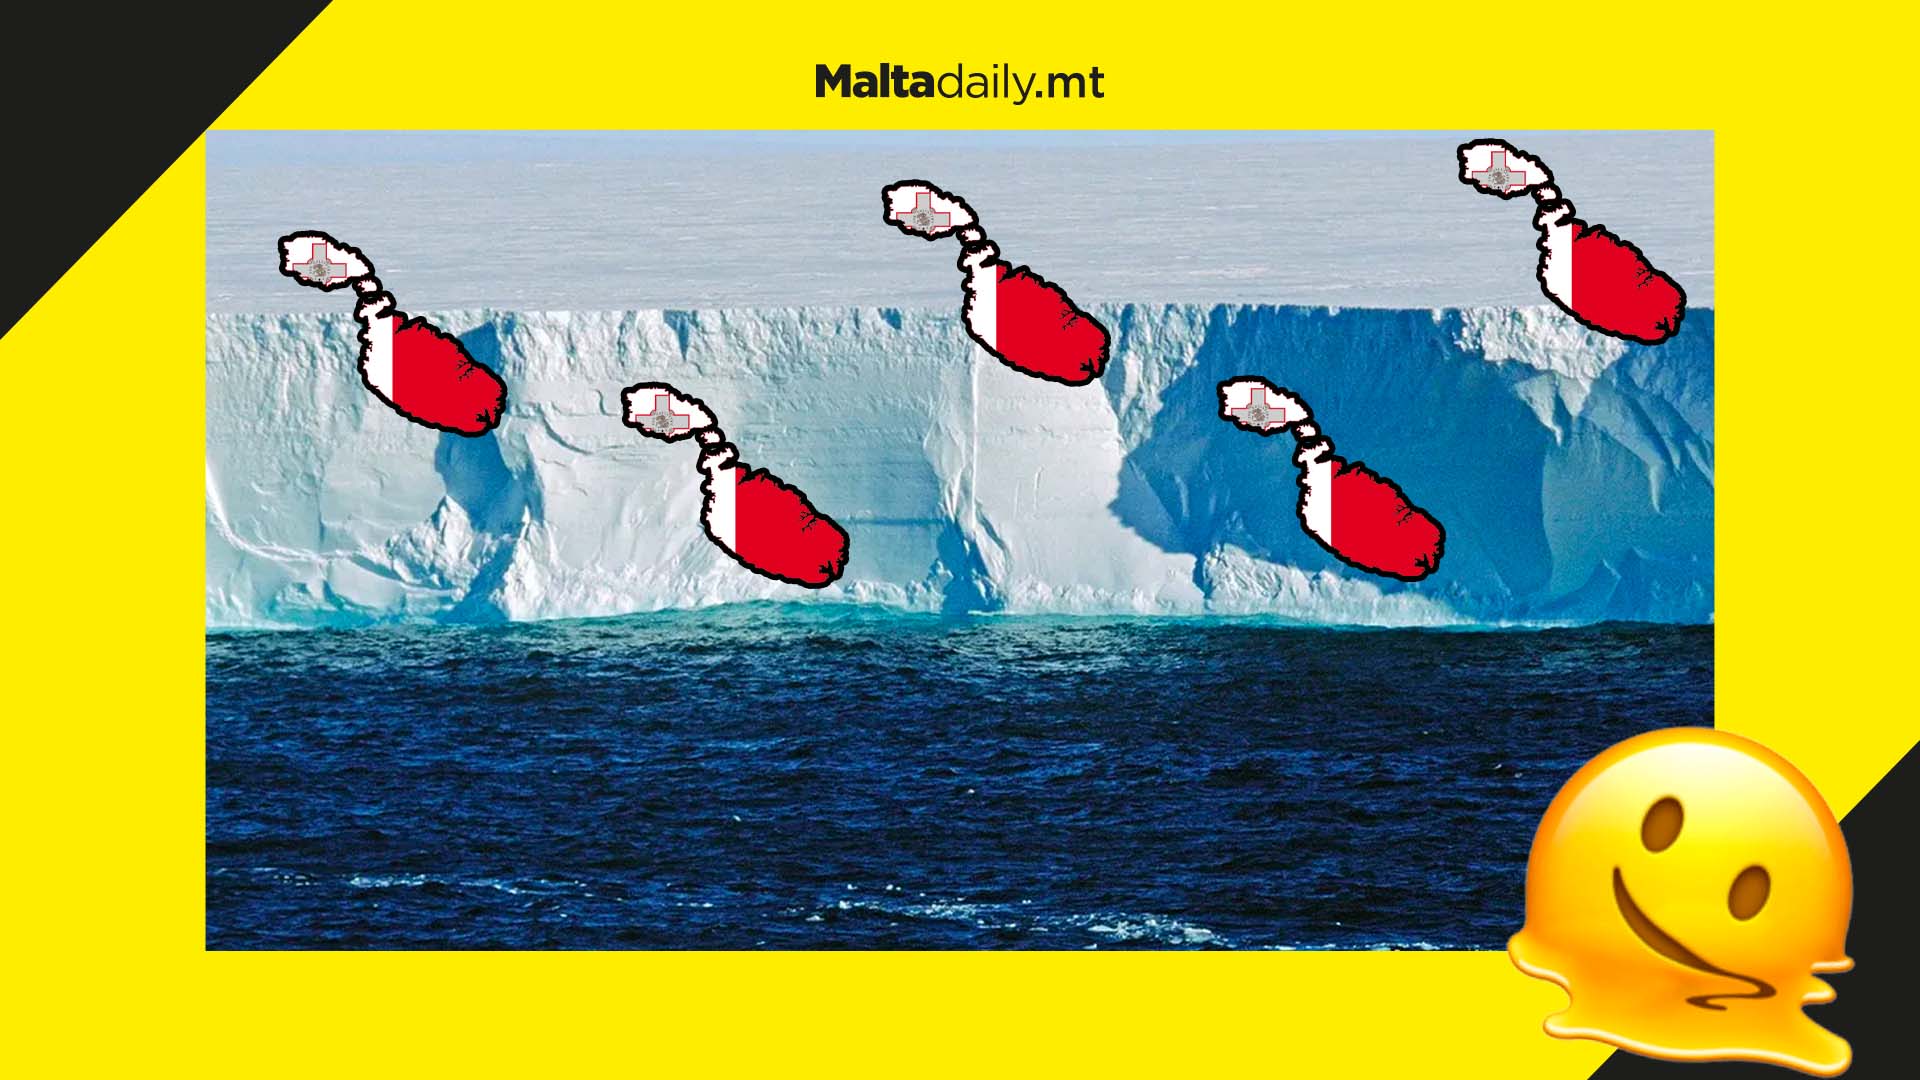 Glacier the size of 500 Malta’s is ‘hanging on by it’s fingernails’